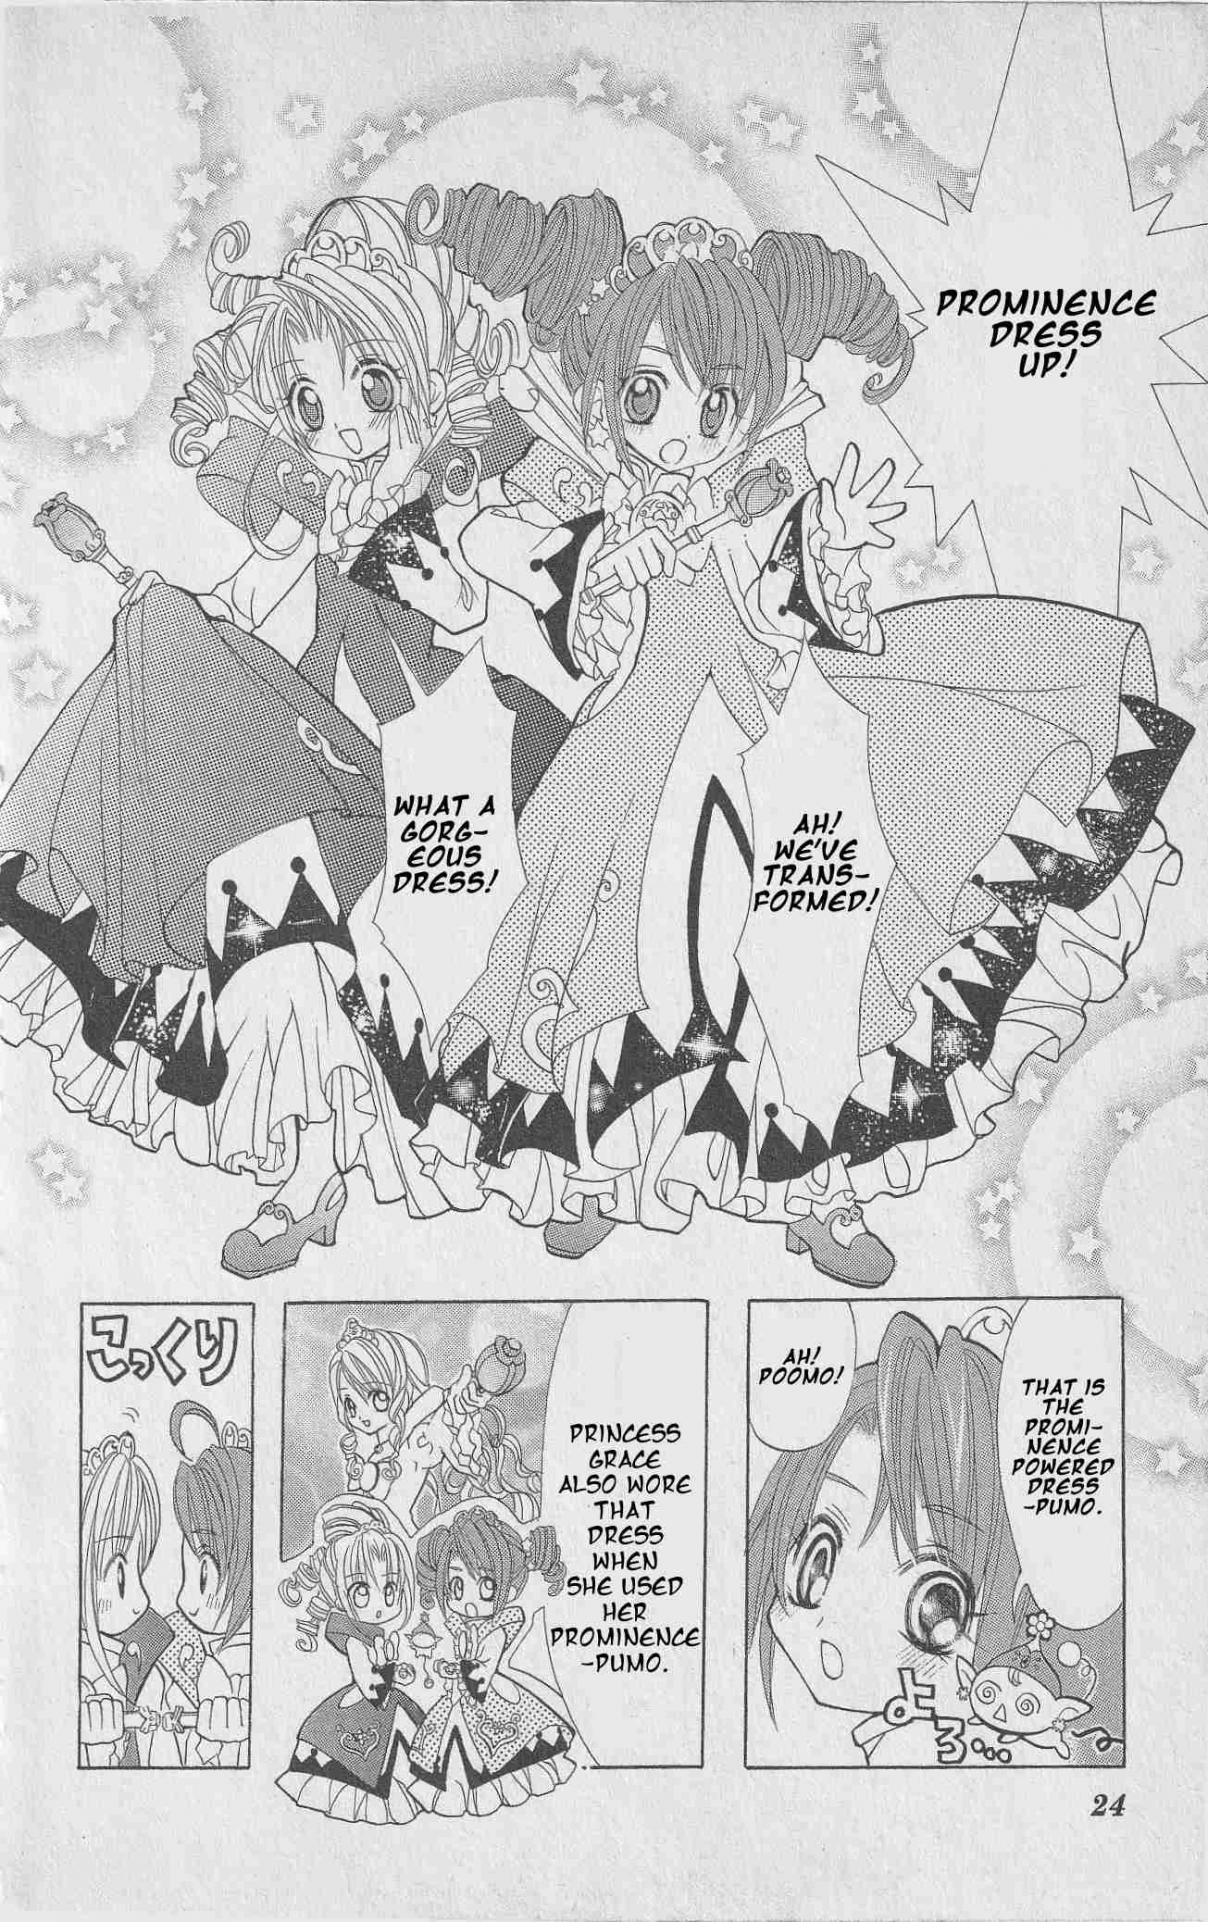 The Twin Princesses of the Wonder Planet: Lovely Kingdom Vol. 1 Ch. 1